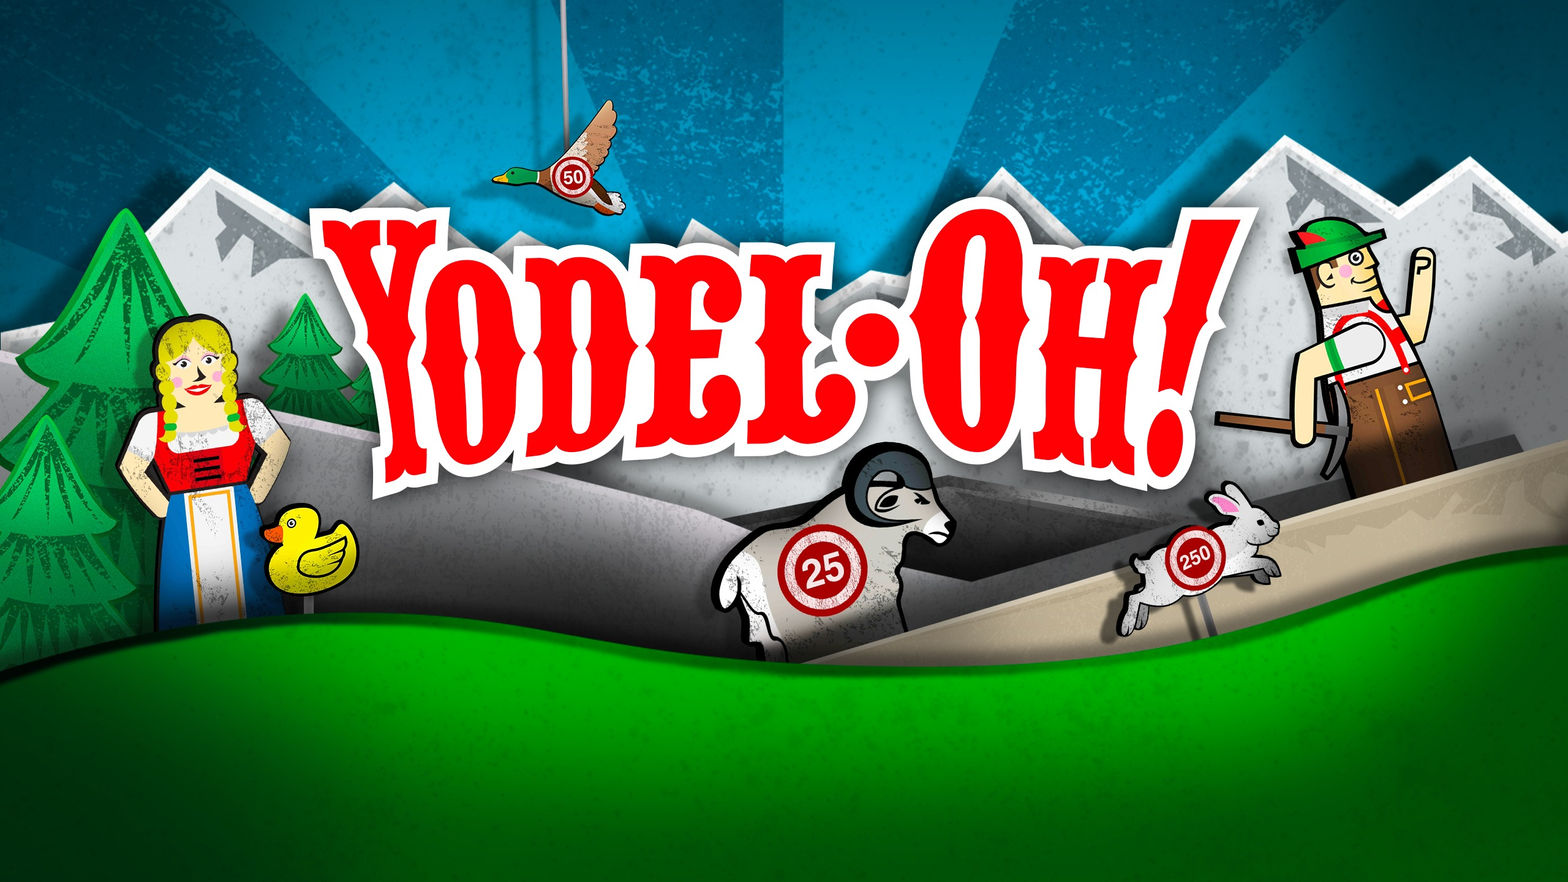 Yodel-Oh!